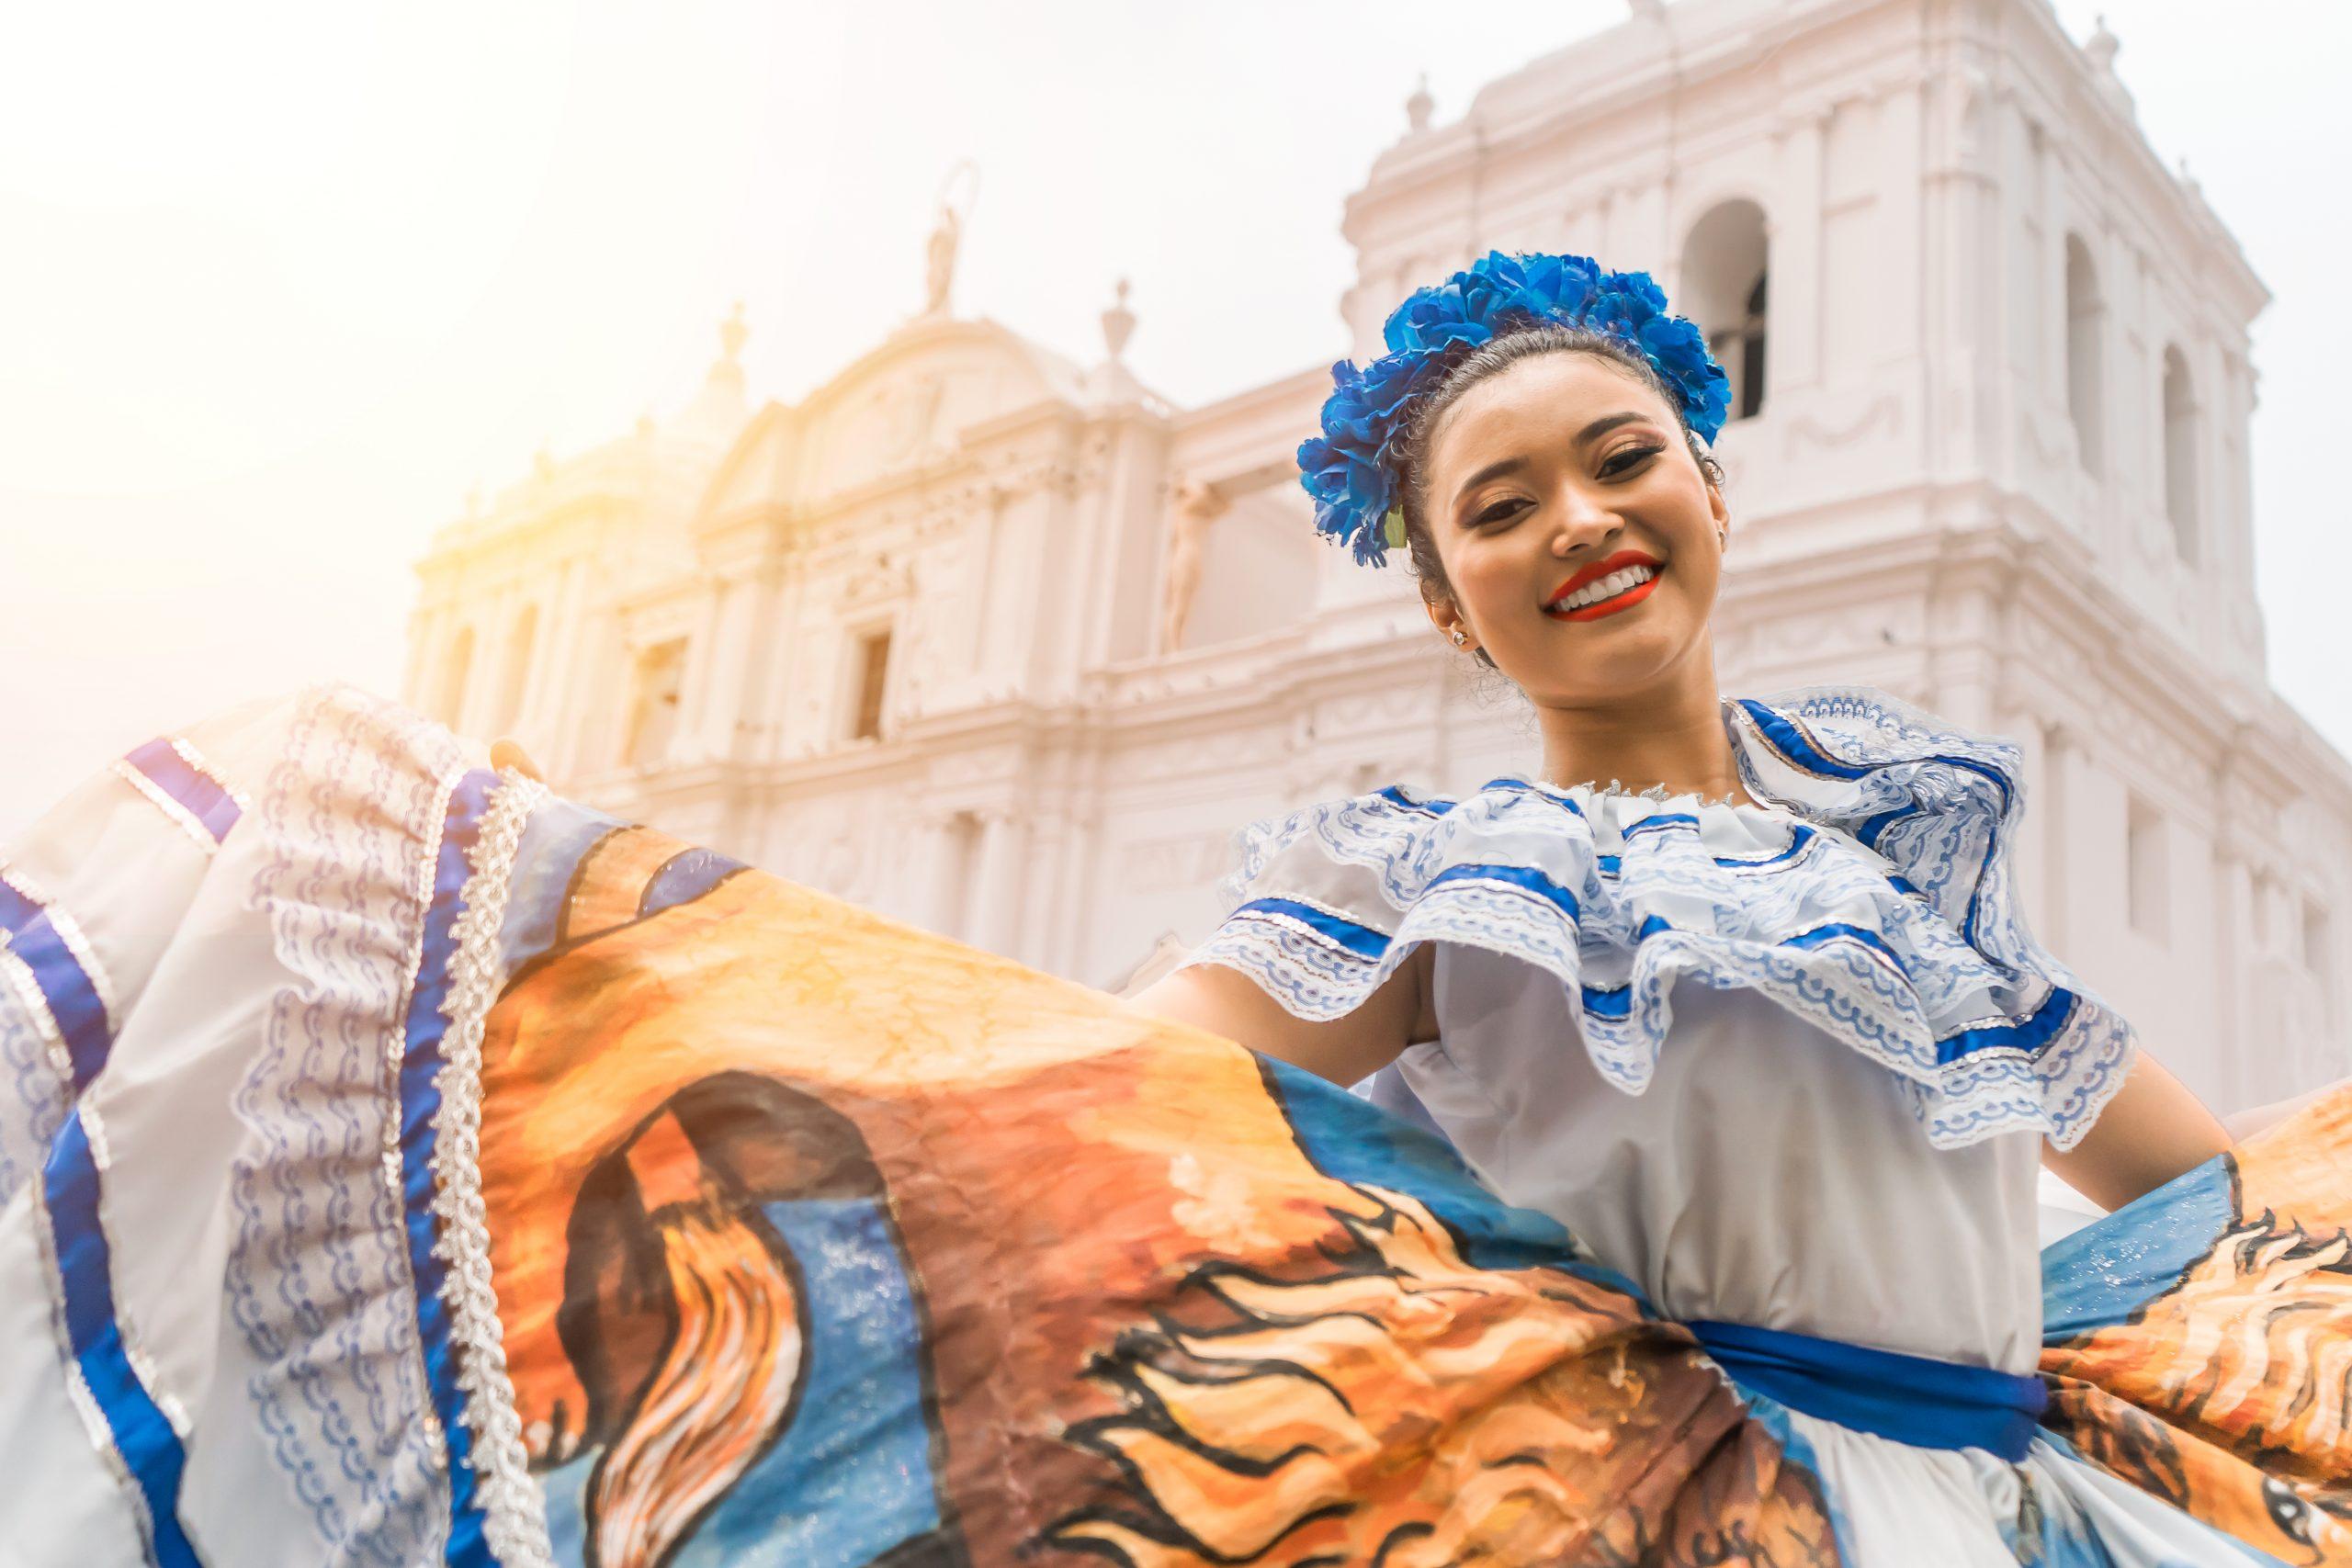 Nicaraguan folklore dancer smiling and looking at the camera outside the cathedral church in the central park of the city of Leon. The woman wears the typical dress of Central America and similar to countries of South America